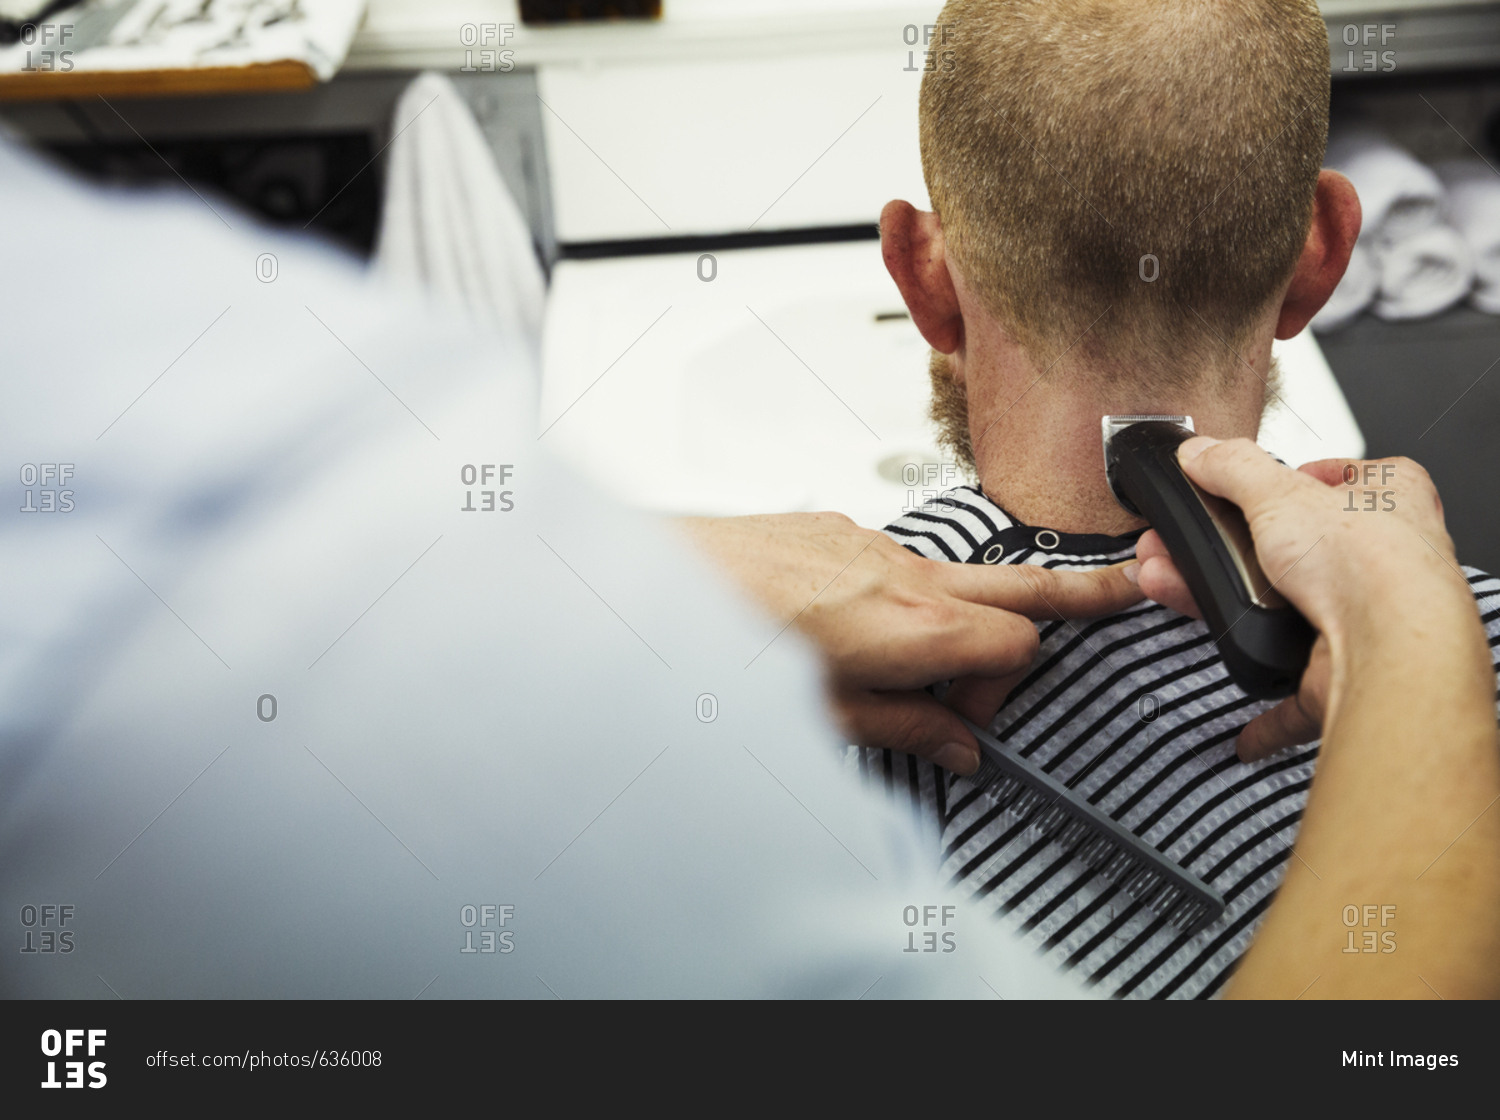 A customer sitting in the barber's chair, and a barber using a beard trimmer on his neck.